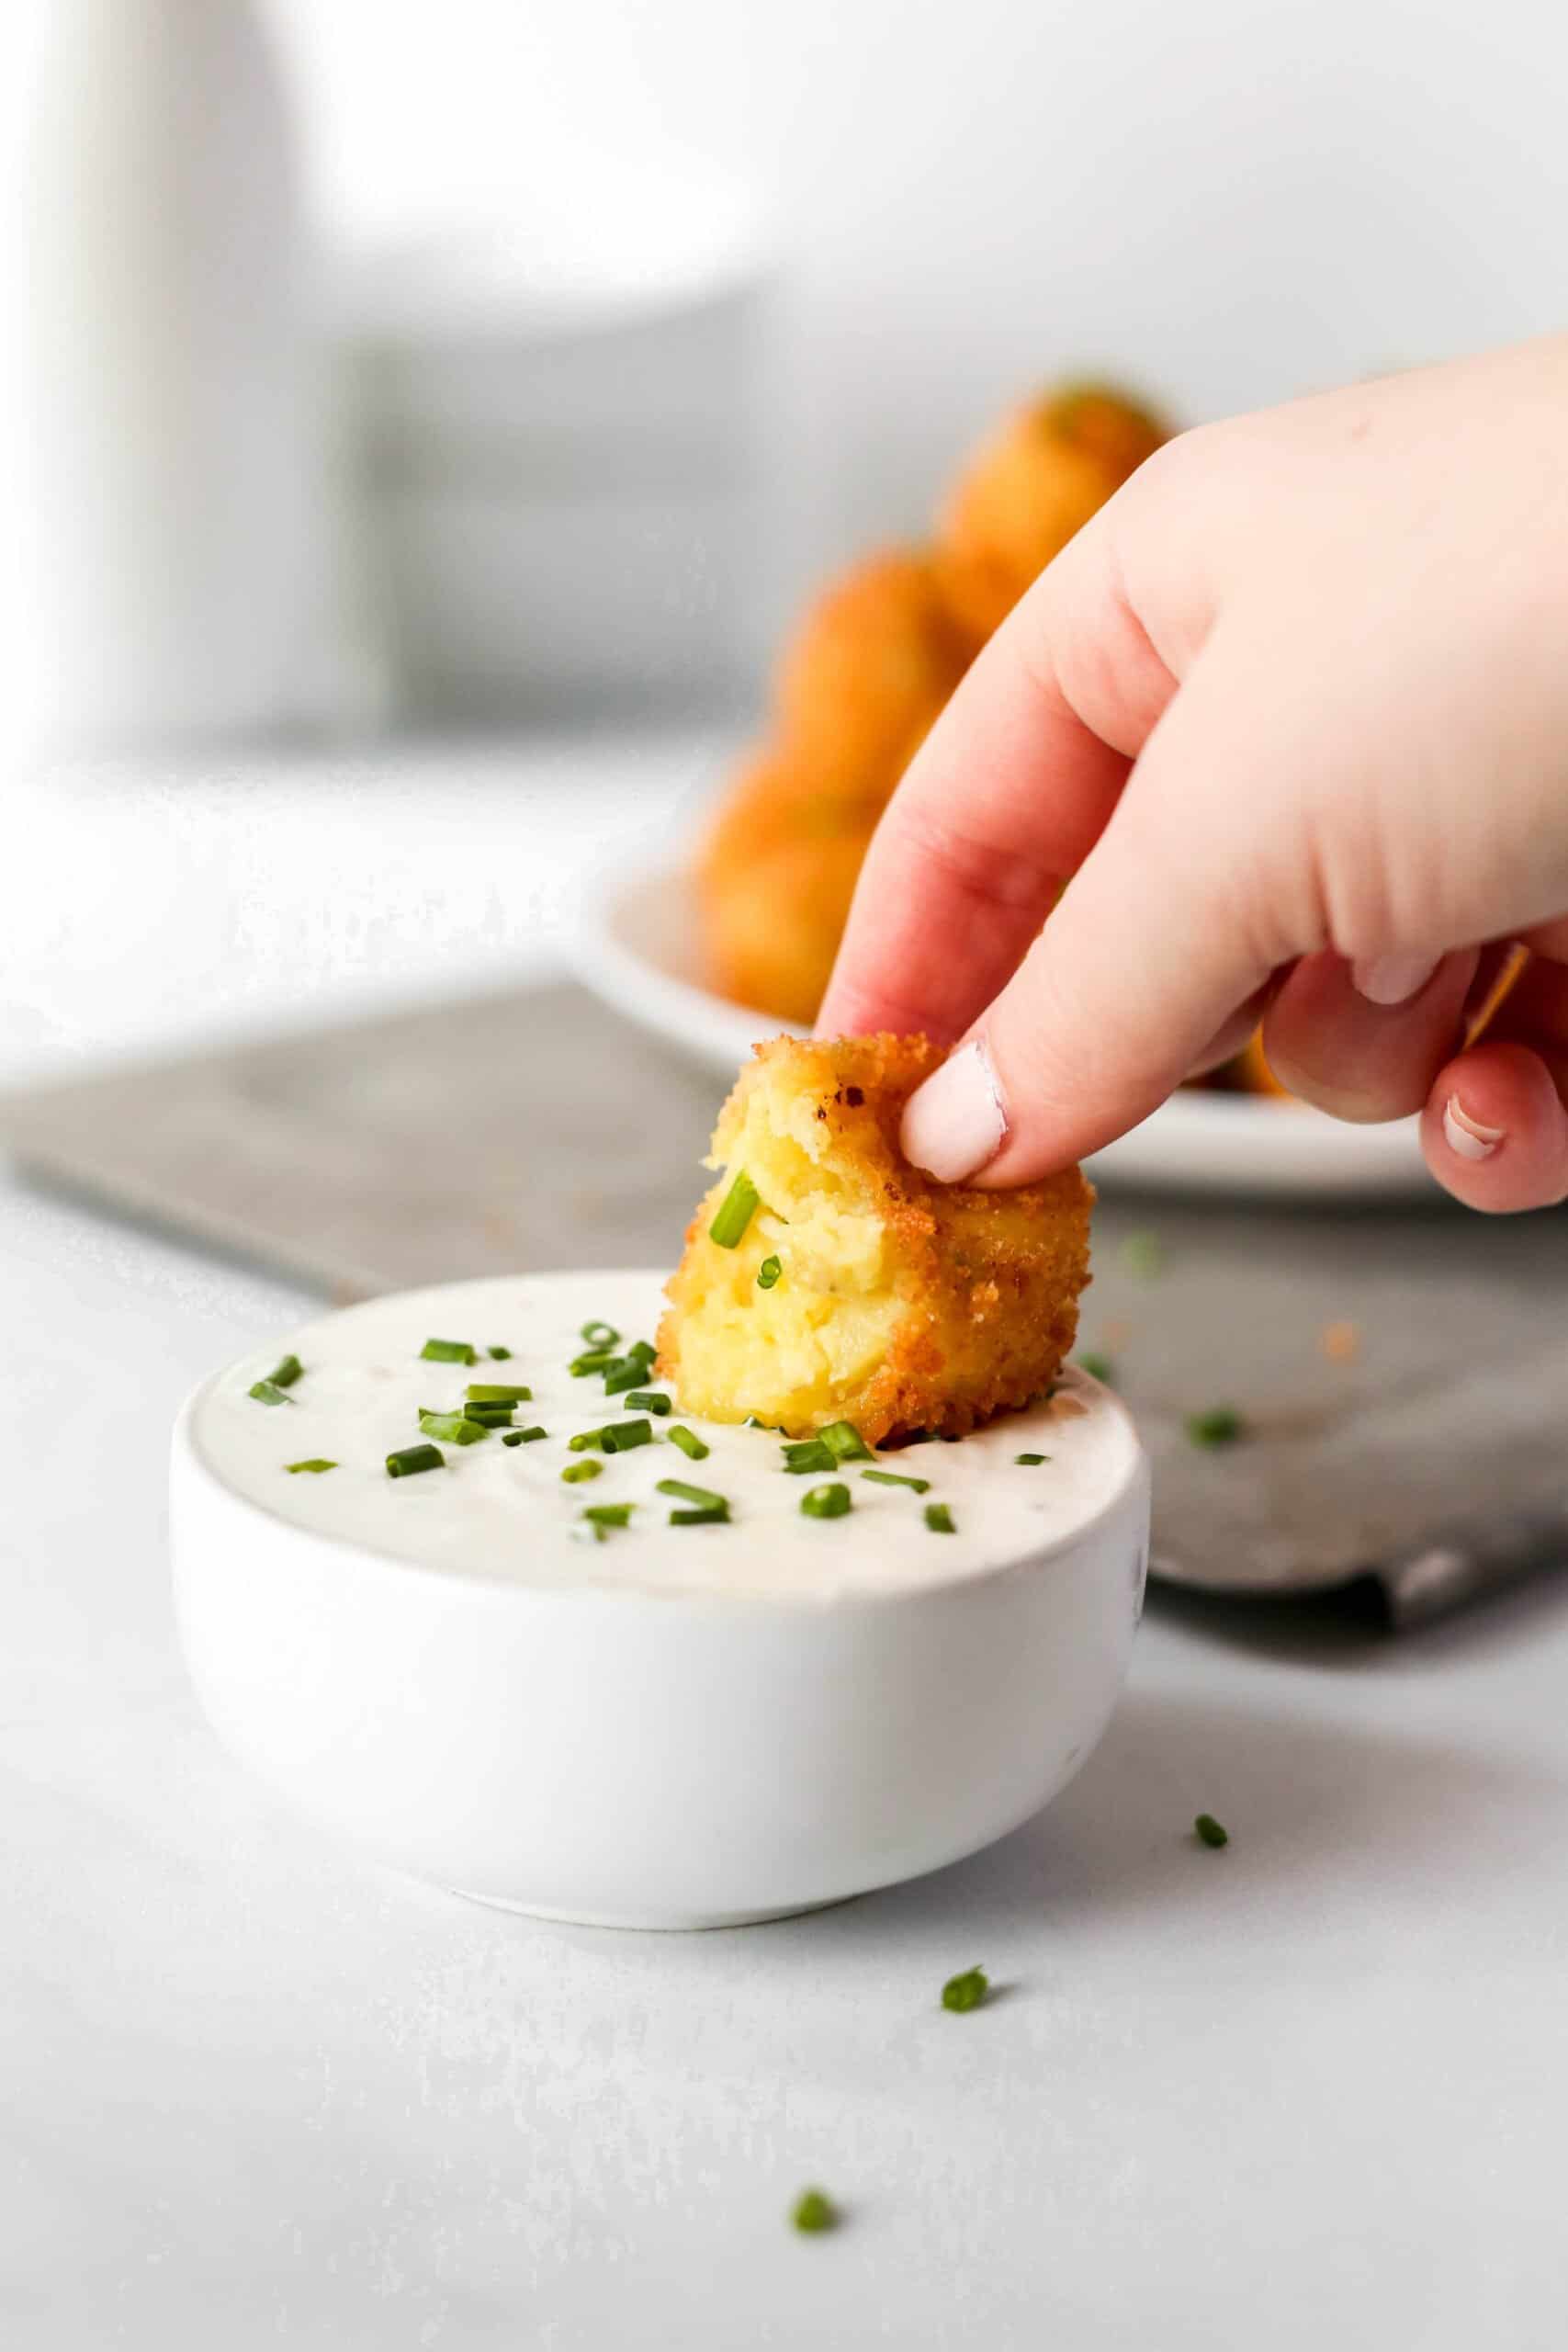 Potato croquettes dipping into sauce.